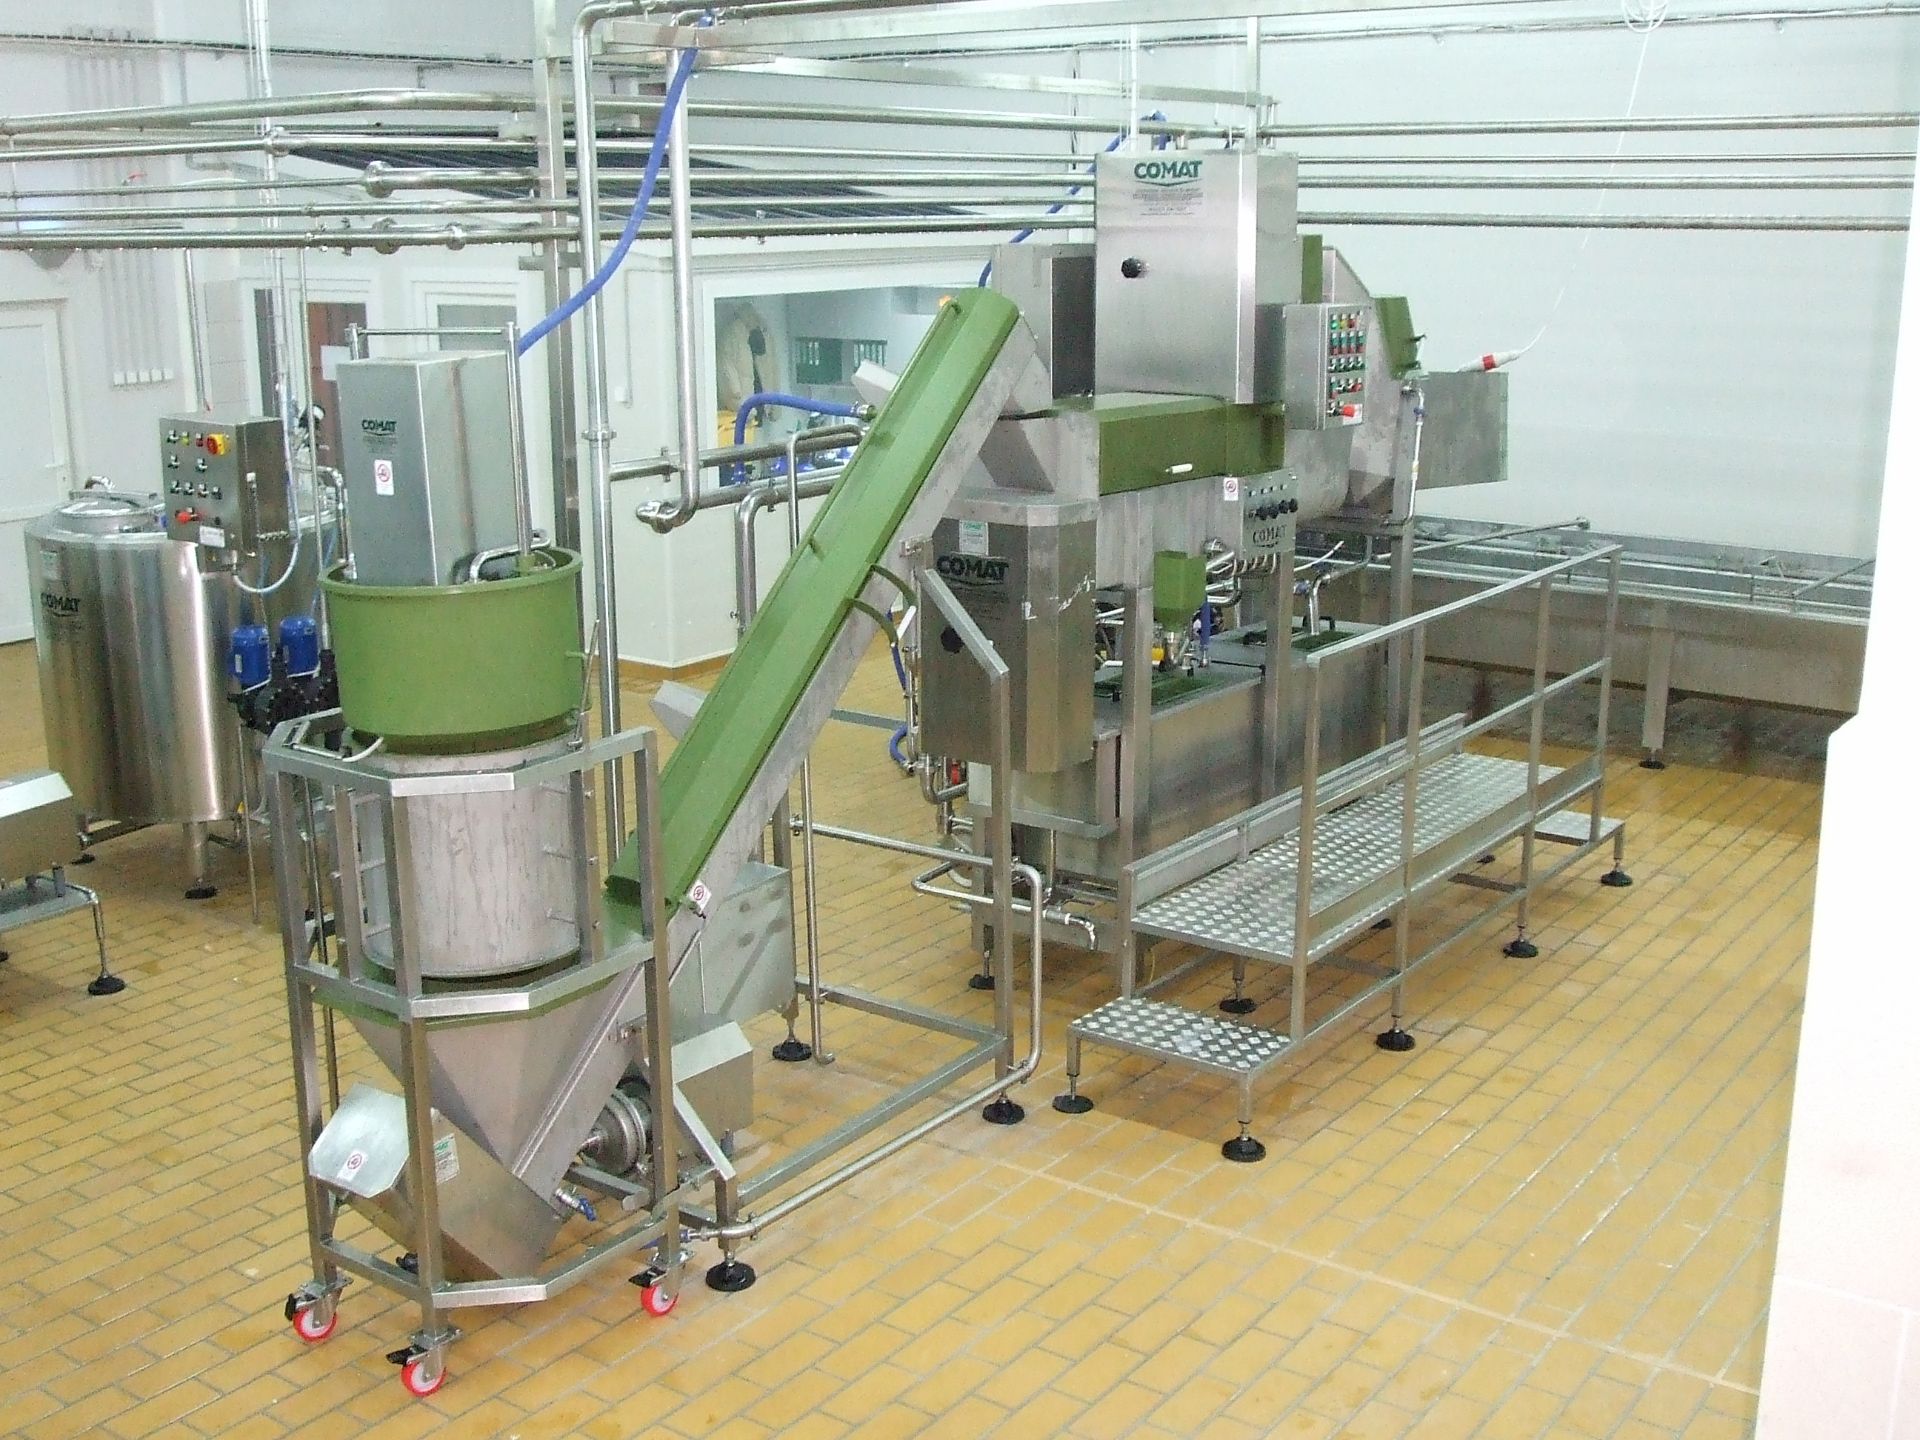 2X COMAT PROCESSING LINES FOR MOZZARELLA CHEESE TO PRODUCE MOZZARELLA STICKS AND MOZZARELLA BLOCKS